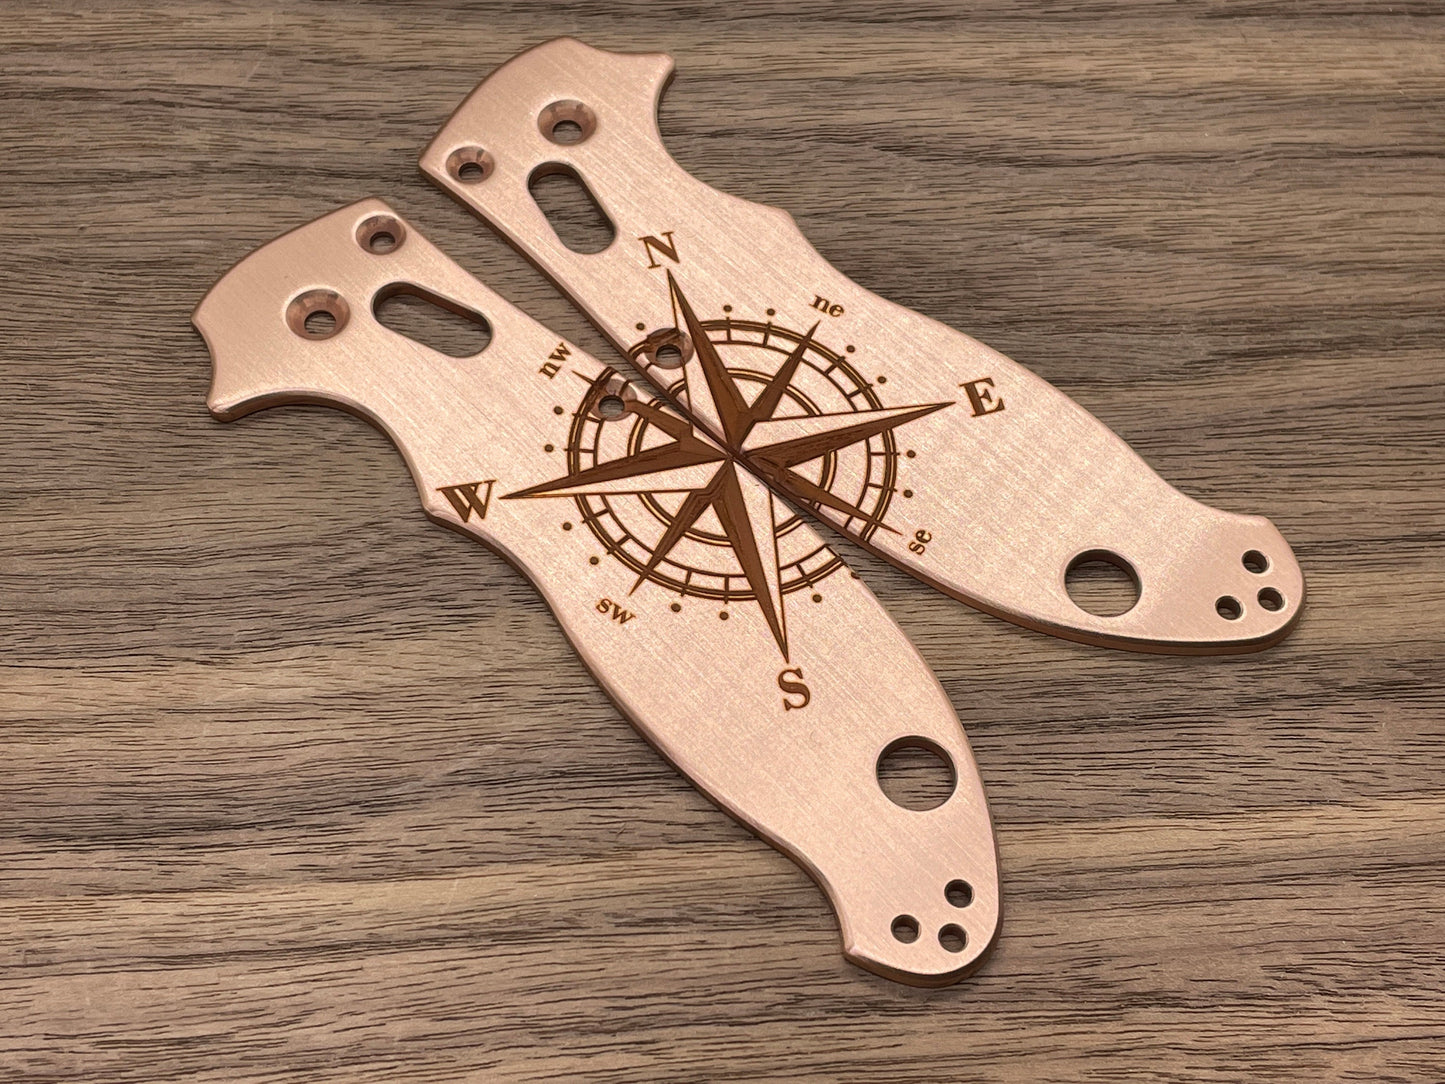 COMPASS engraved Copper scales for Spyderco MANIX 2